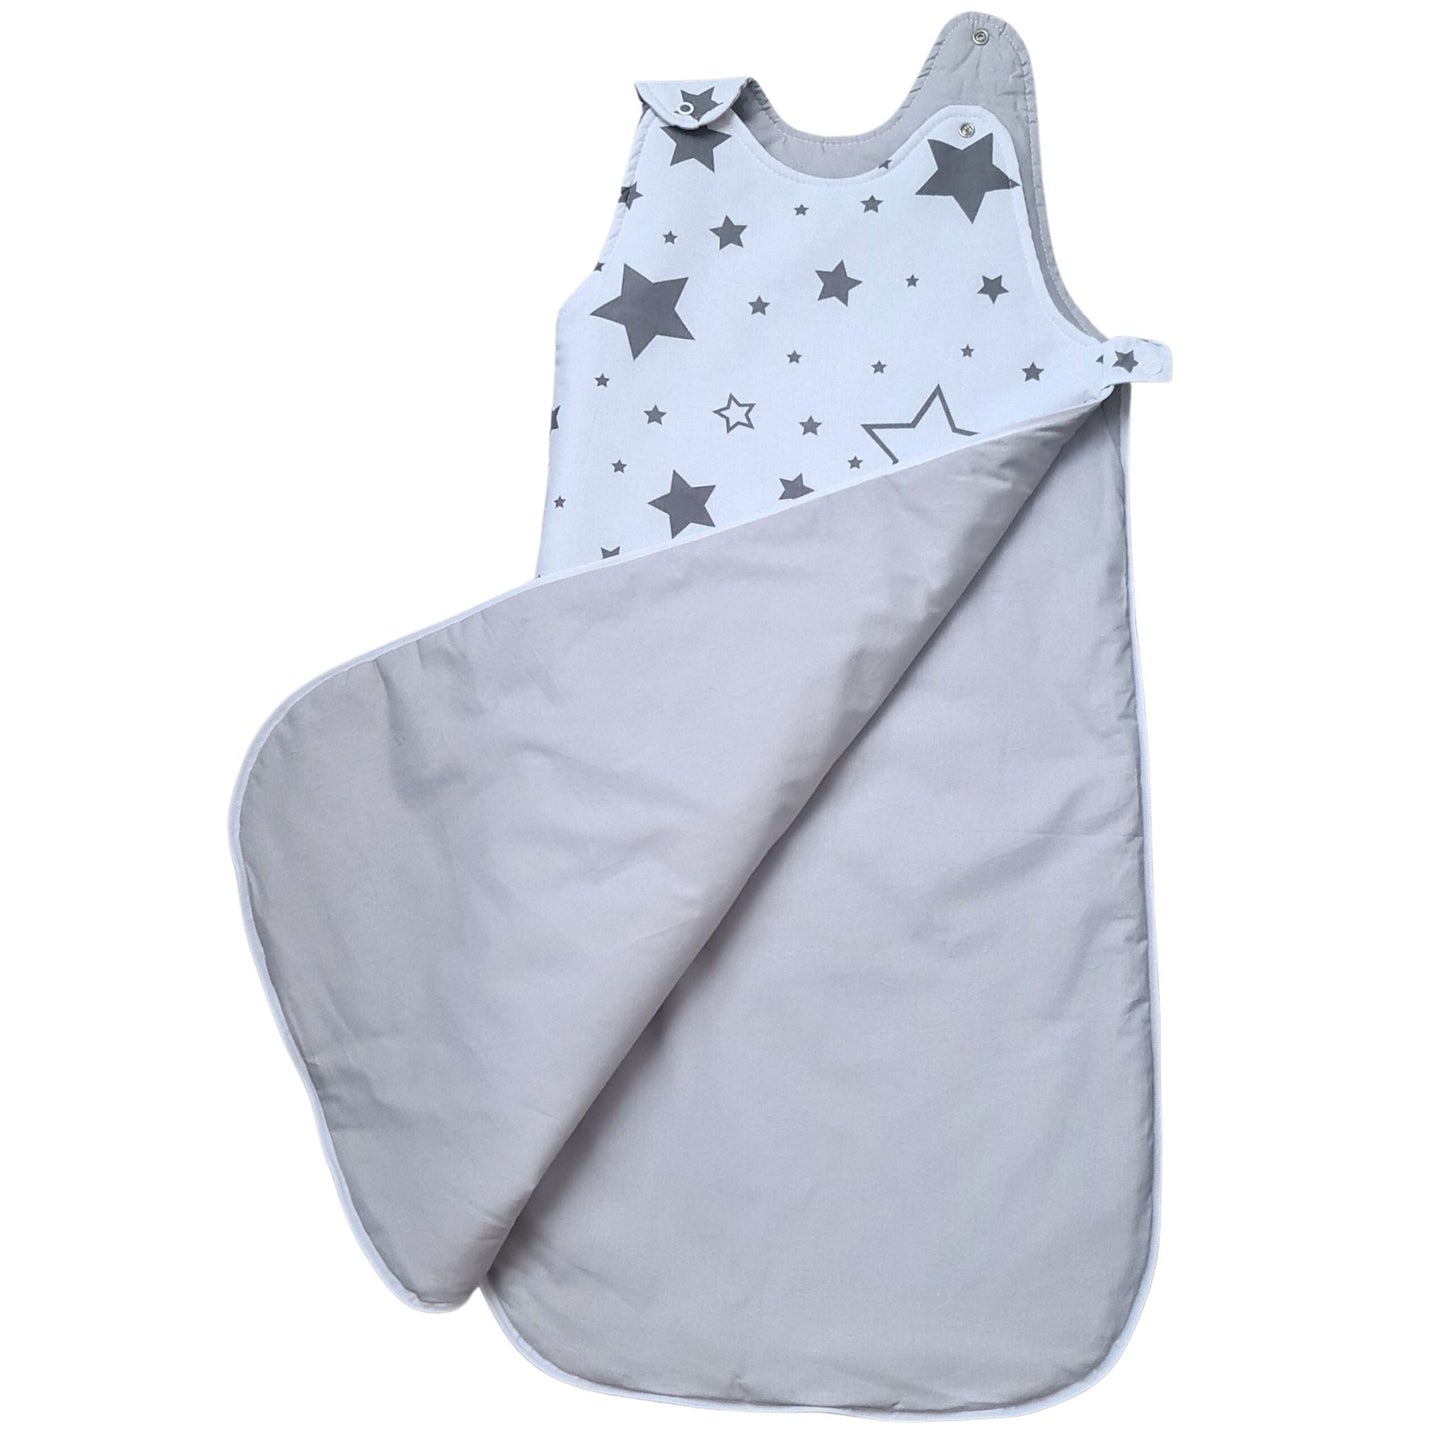 100% cptton sleeping bag for baby 6-12 months